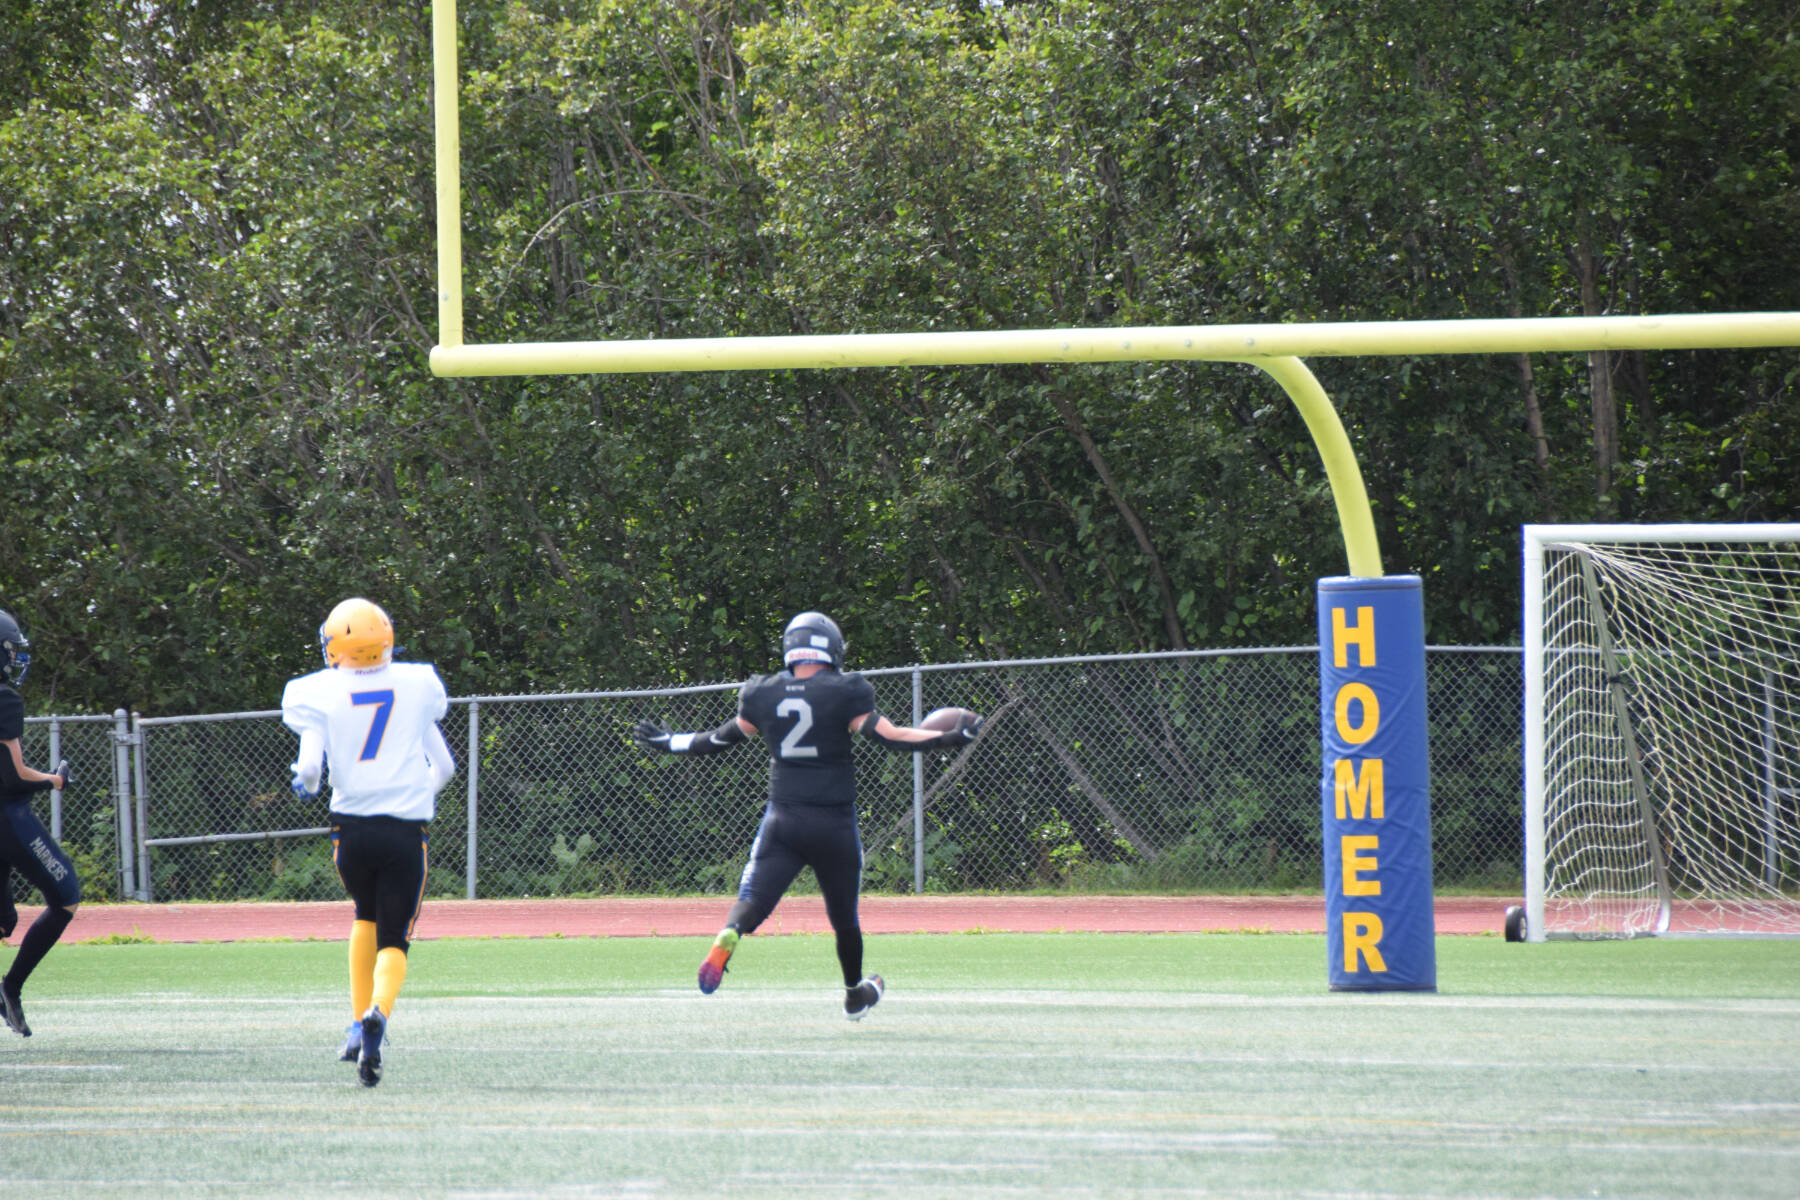 Homer’s Chris Martishev catches a 58-yard pass from quarterback Preston Stanislaw, scoring a touchdown and bringing the Mariners’ score up to eight points in the first quarter of the home opener varsity game on Saturday, Aug. 12, 2023 in Homer, Alaska. (Delcenia Cosman/Homer News)